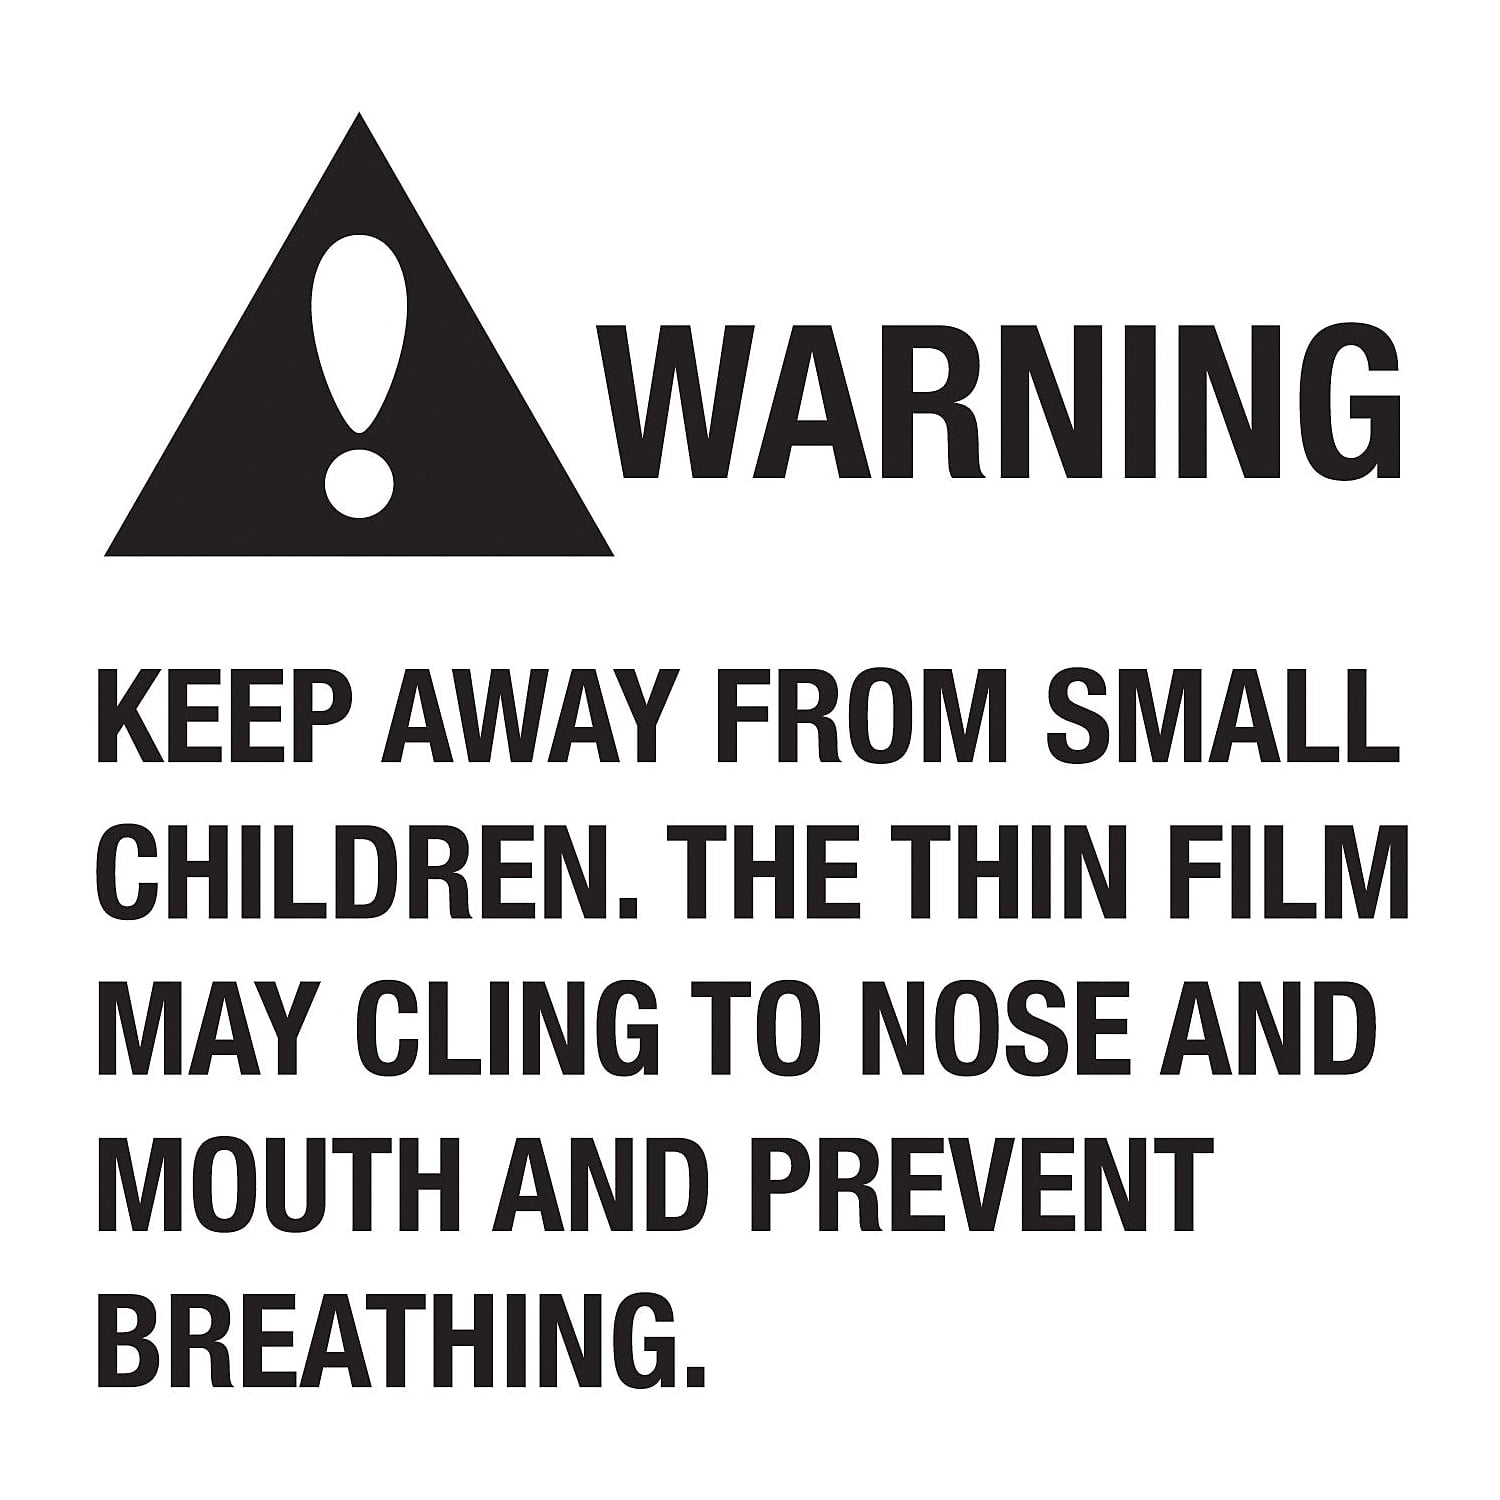 UPC 848109018317 product image for Tape Logic DL1301 2 x 2 in. - Warning Keep Away From Small Children Labels, Blac | upcitemdb.com